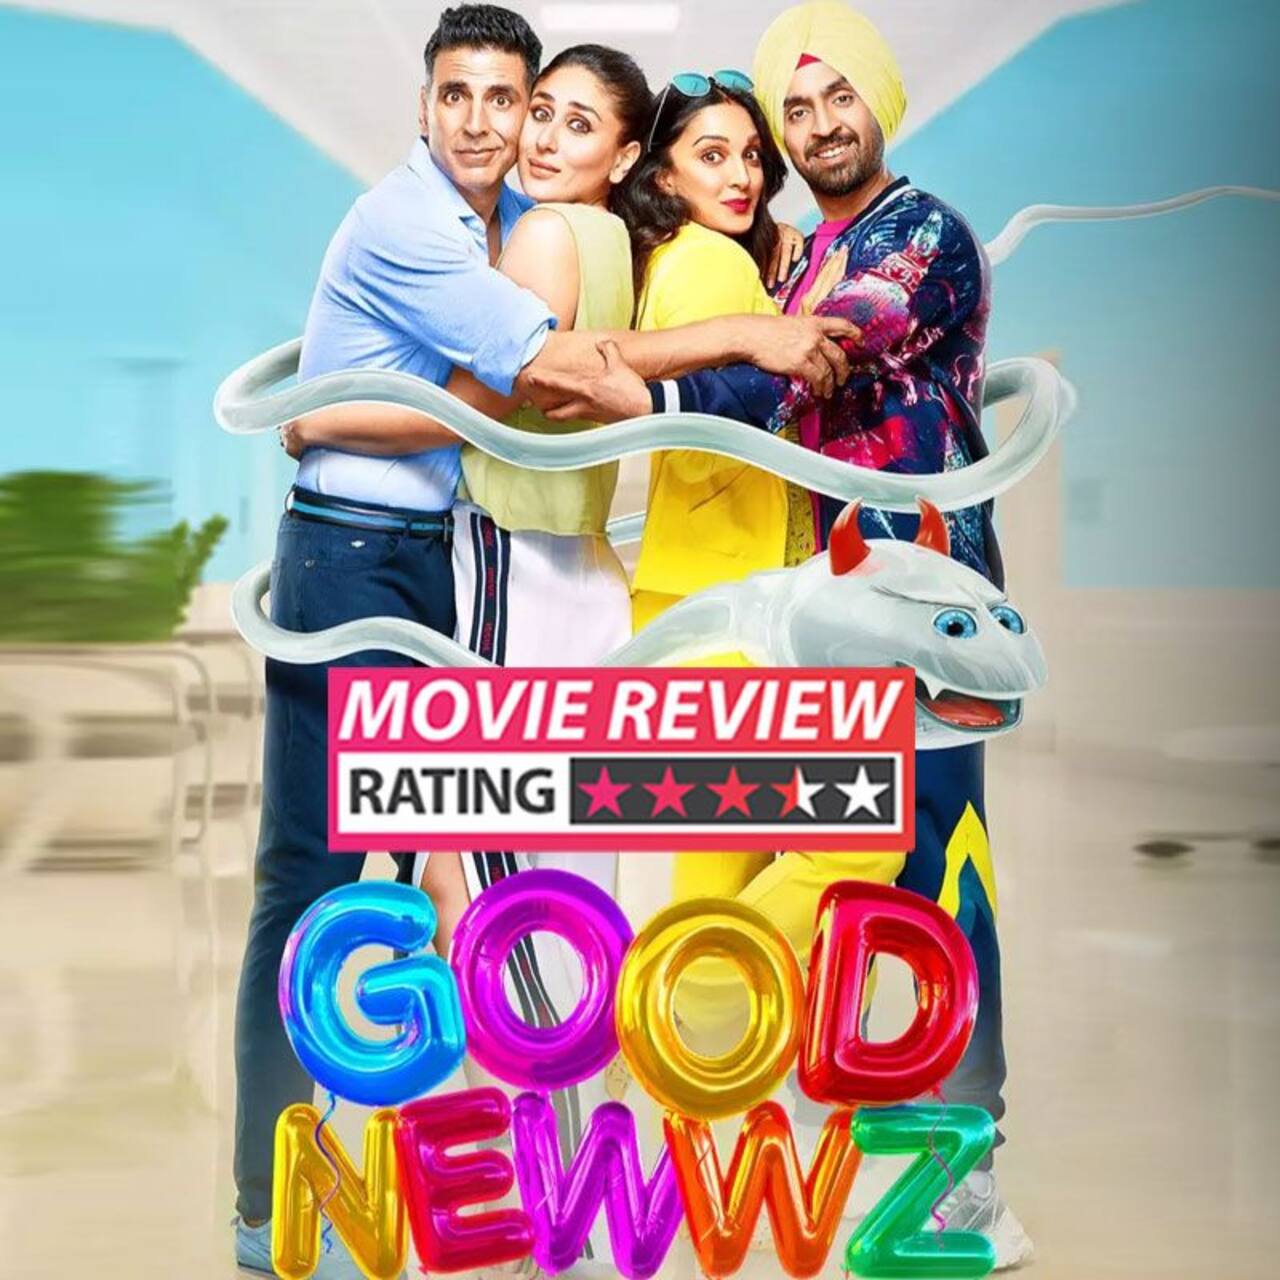 Good Newwz Movie Review: Diljit Dosanjh and Kareena Kapoor Khan excel in this emotional comedy